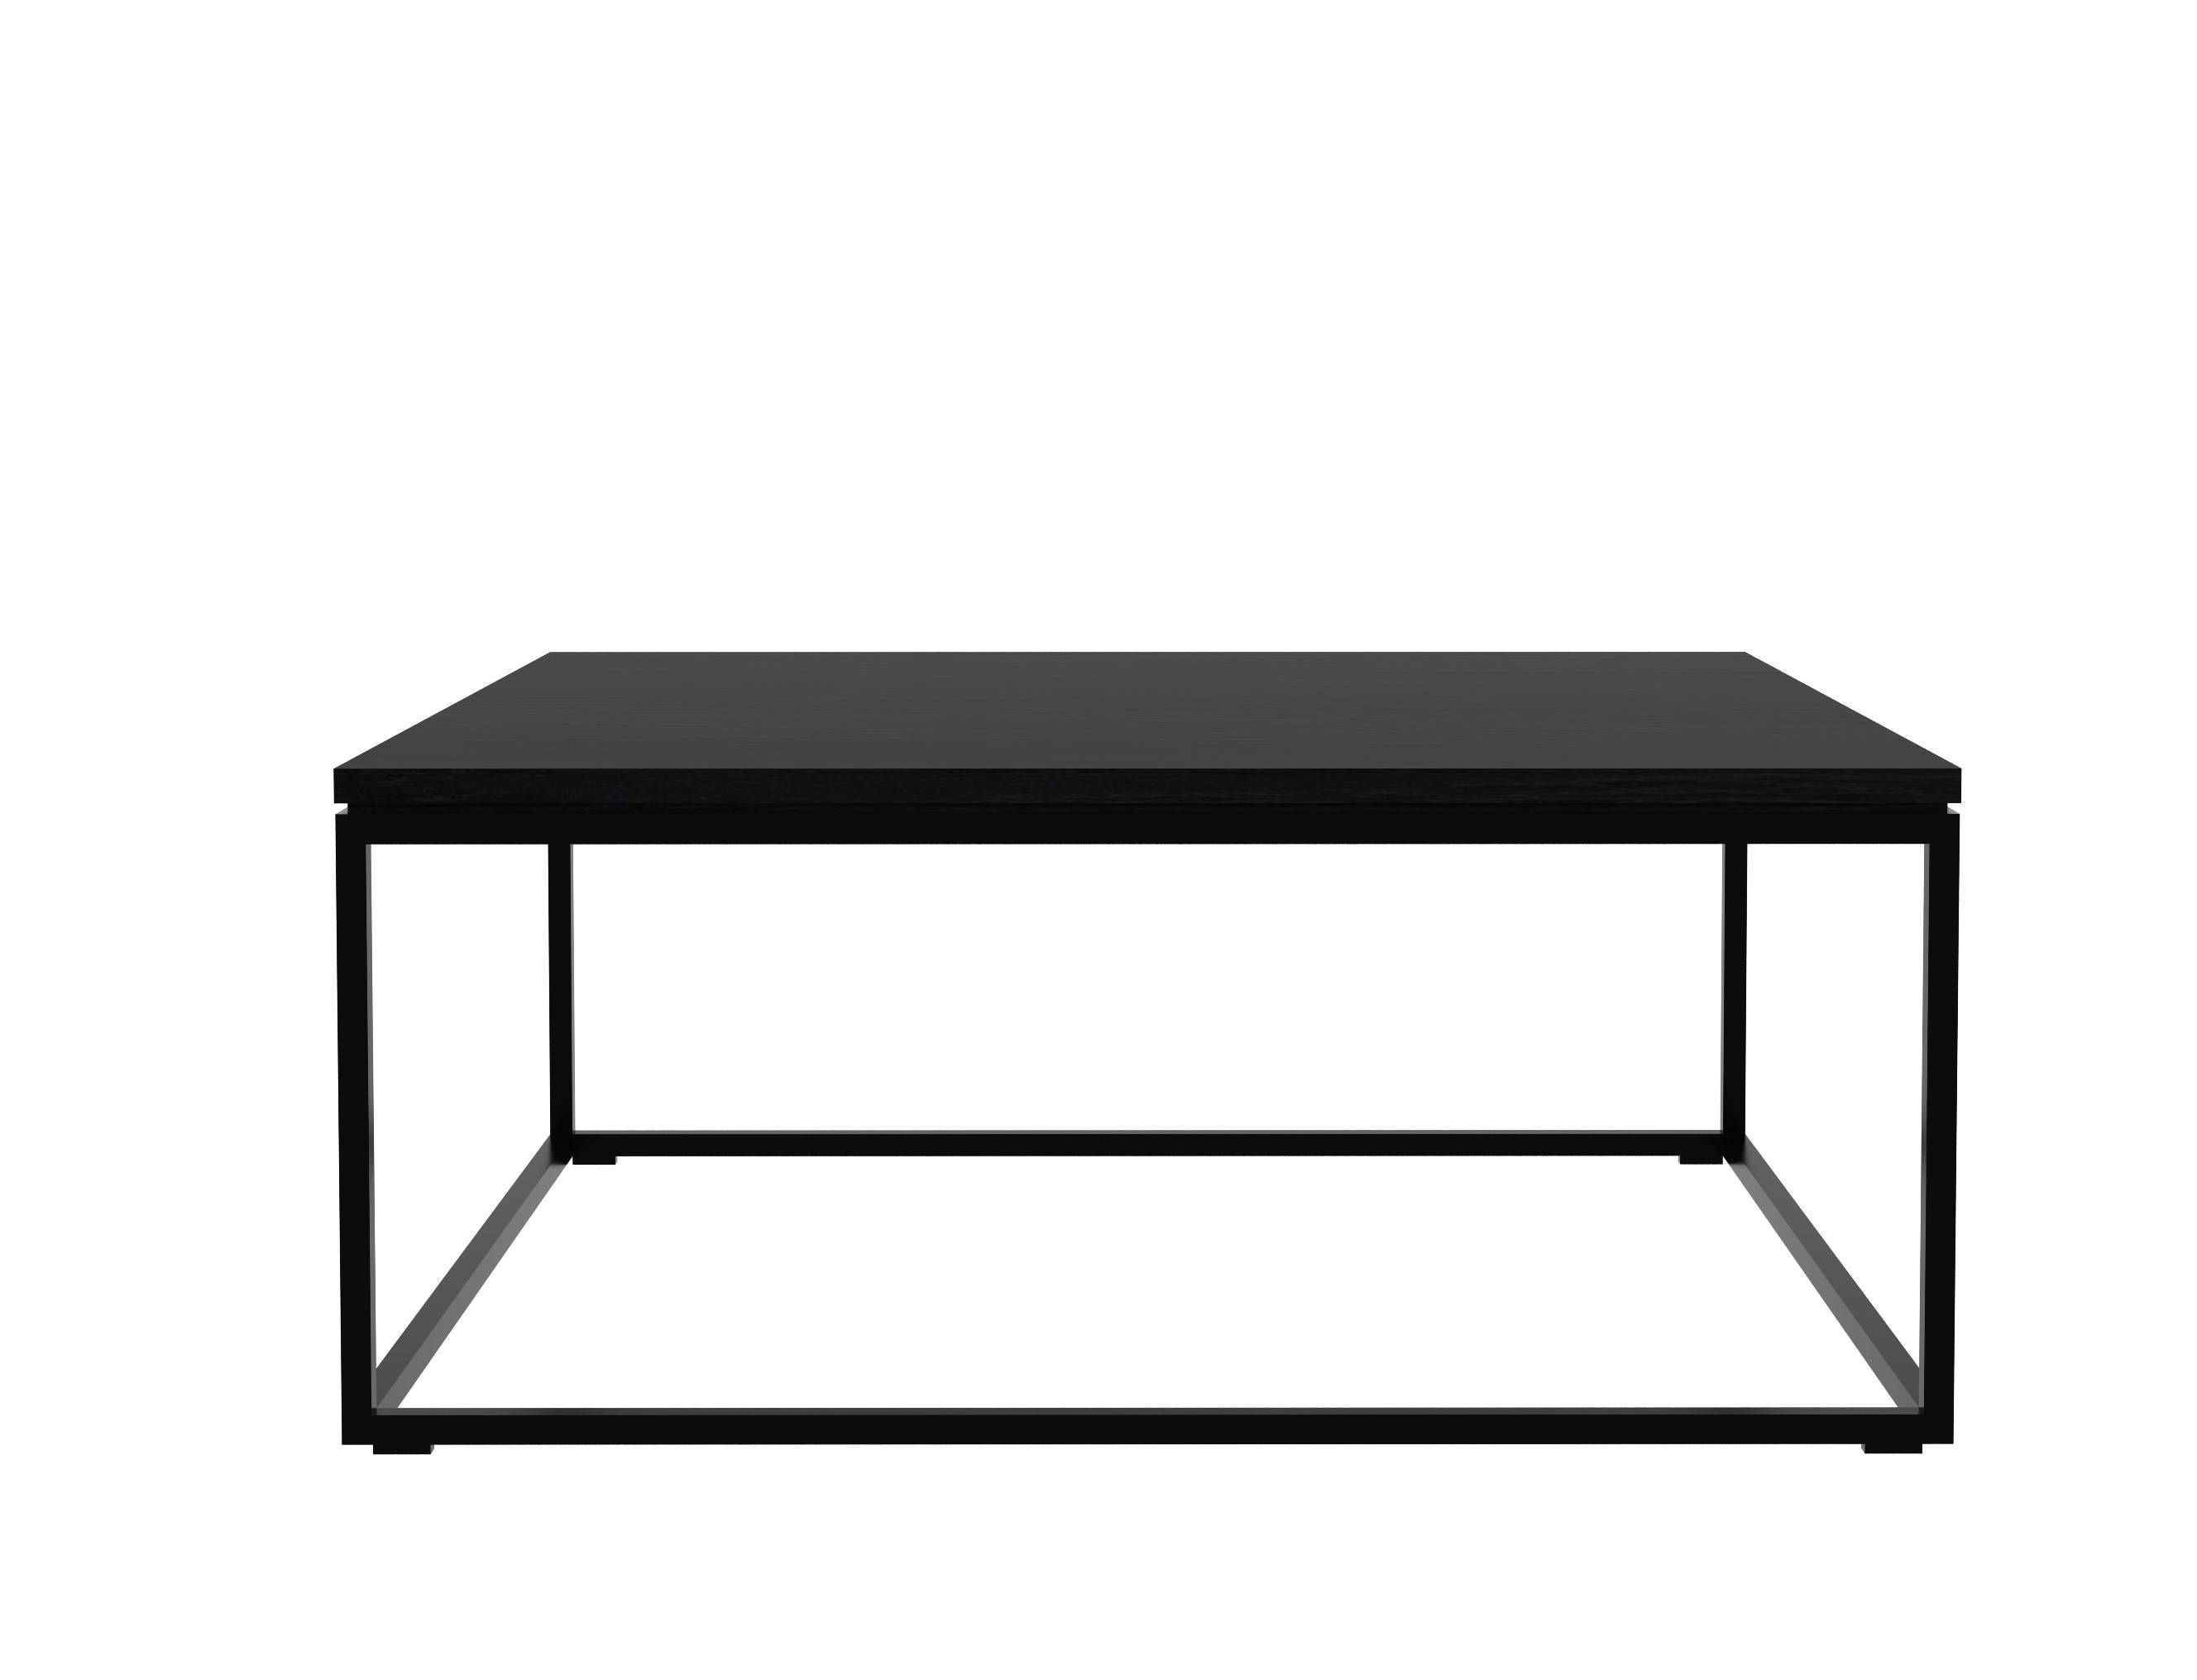 Ethnicraft Thin Coffee Table Black | Funktion Alley Throughout Thin Coffee Tables (View 9 of 30)